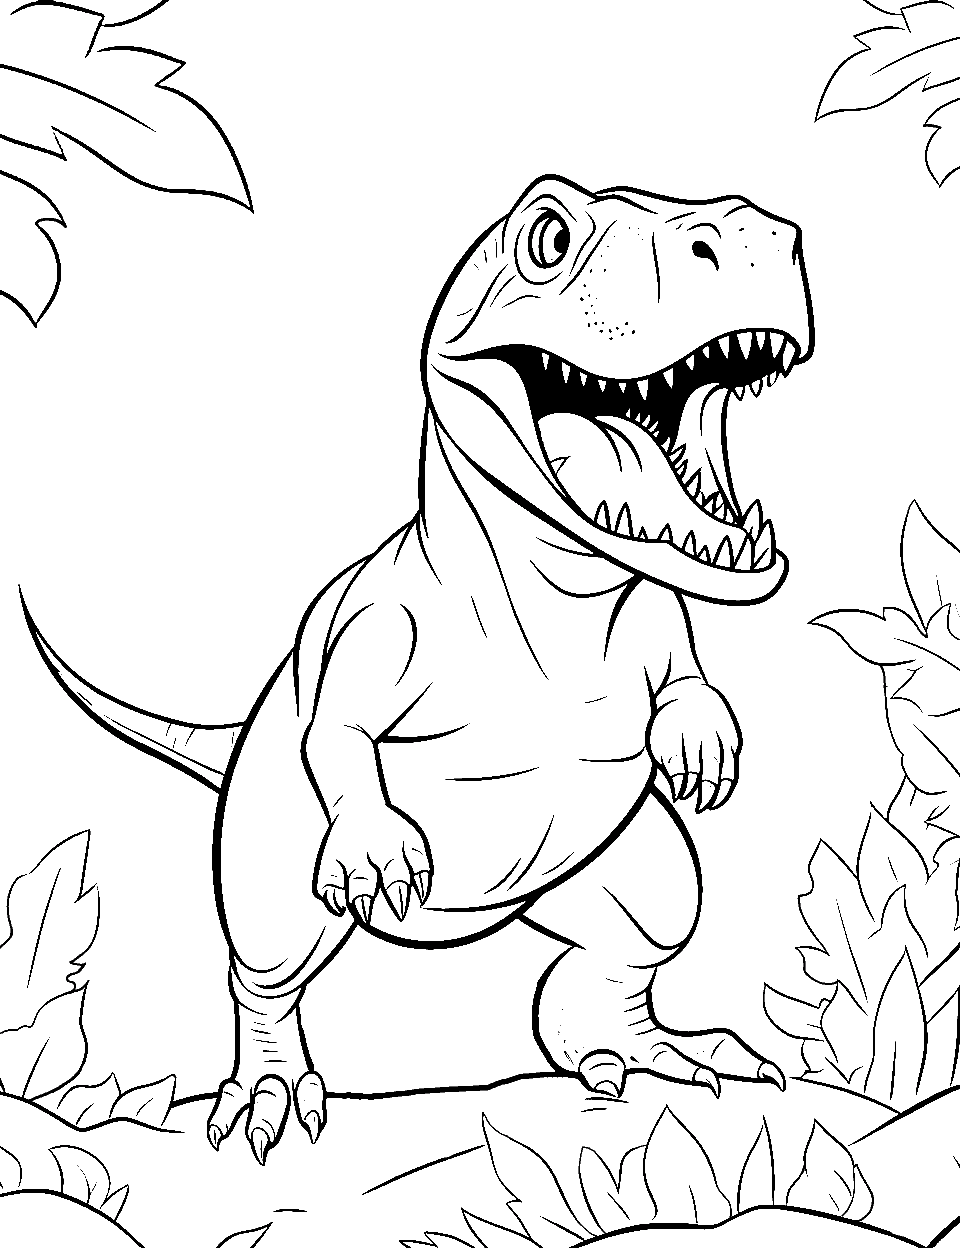 Autumn T Rex T-rex Coloring Page - A T-Rex in an autumn setting.